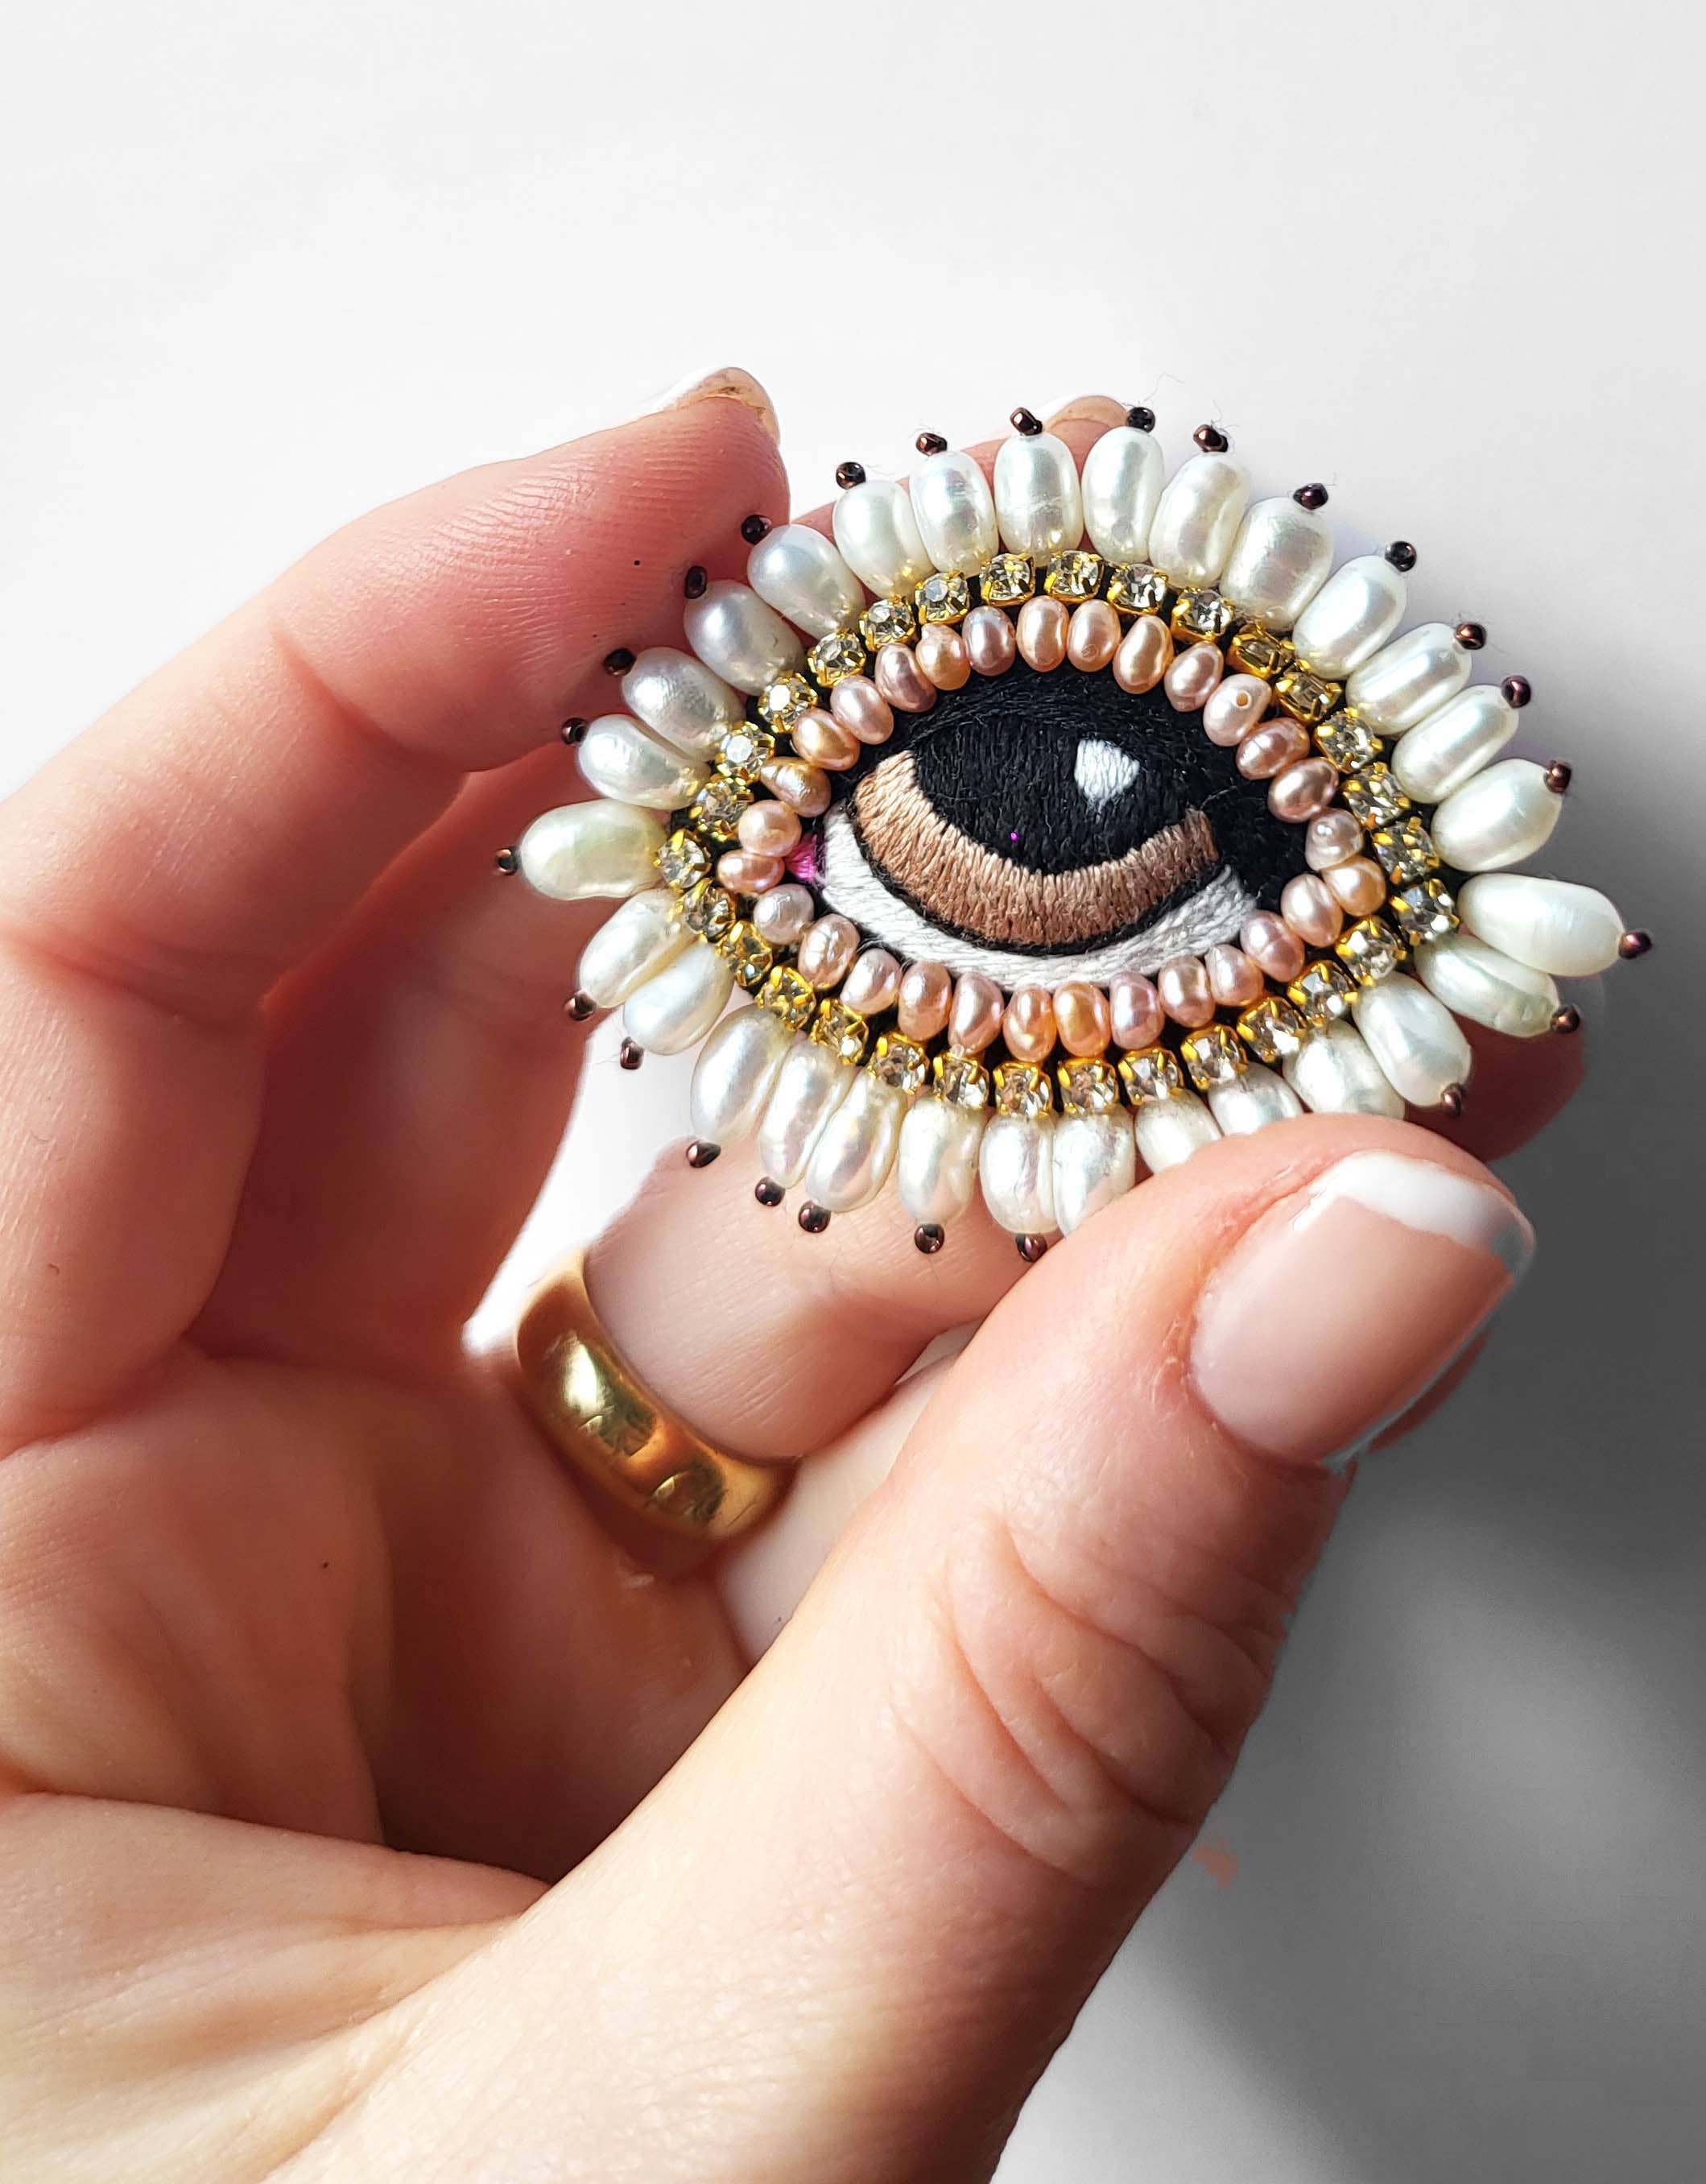 Baroque Eye Brooch With Freshwater Pearls - Miss Parfaite 